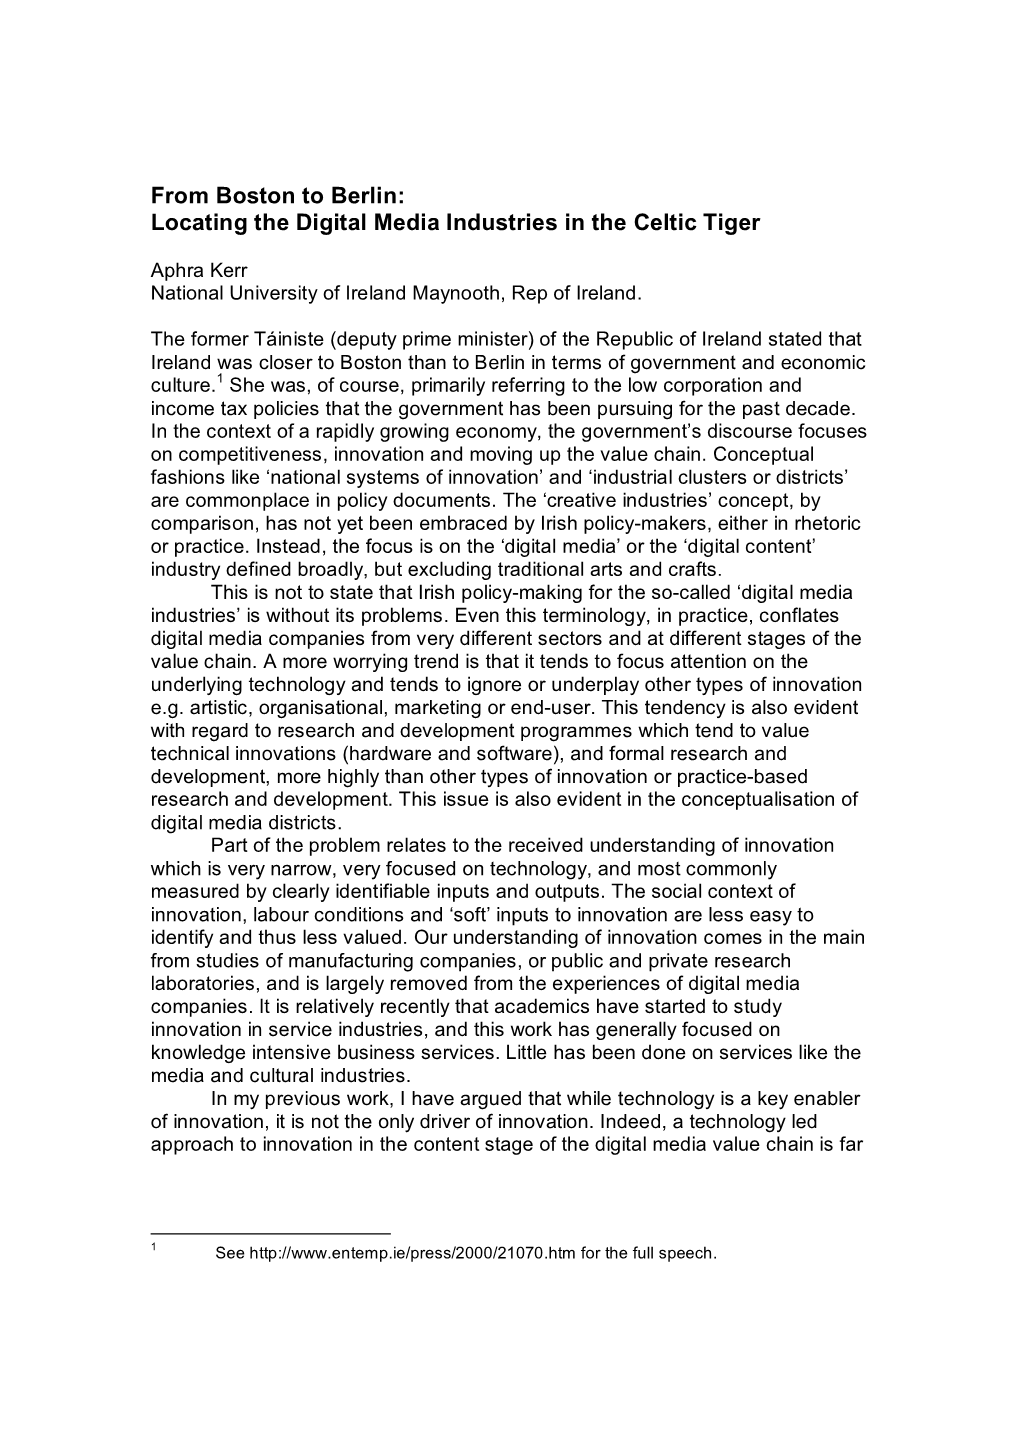 Locating the Digital Media Industries in the Celtic Tiger